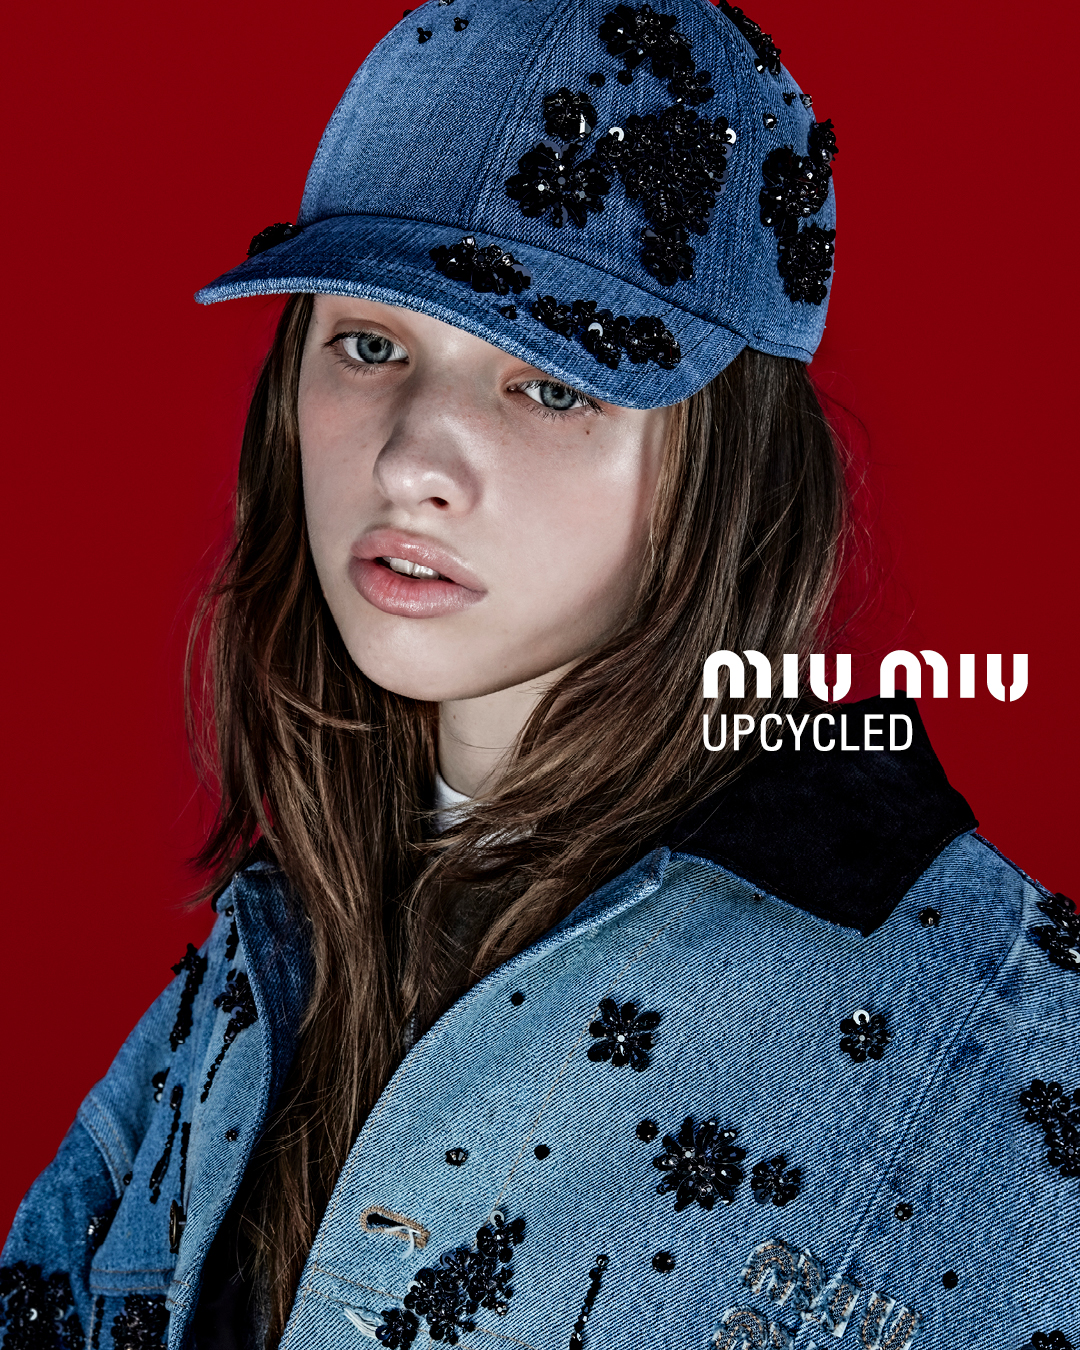 Miu Miu's 2024 Upcycled collection, including jackets, bras & accessories made of vintage denim